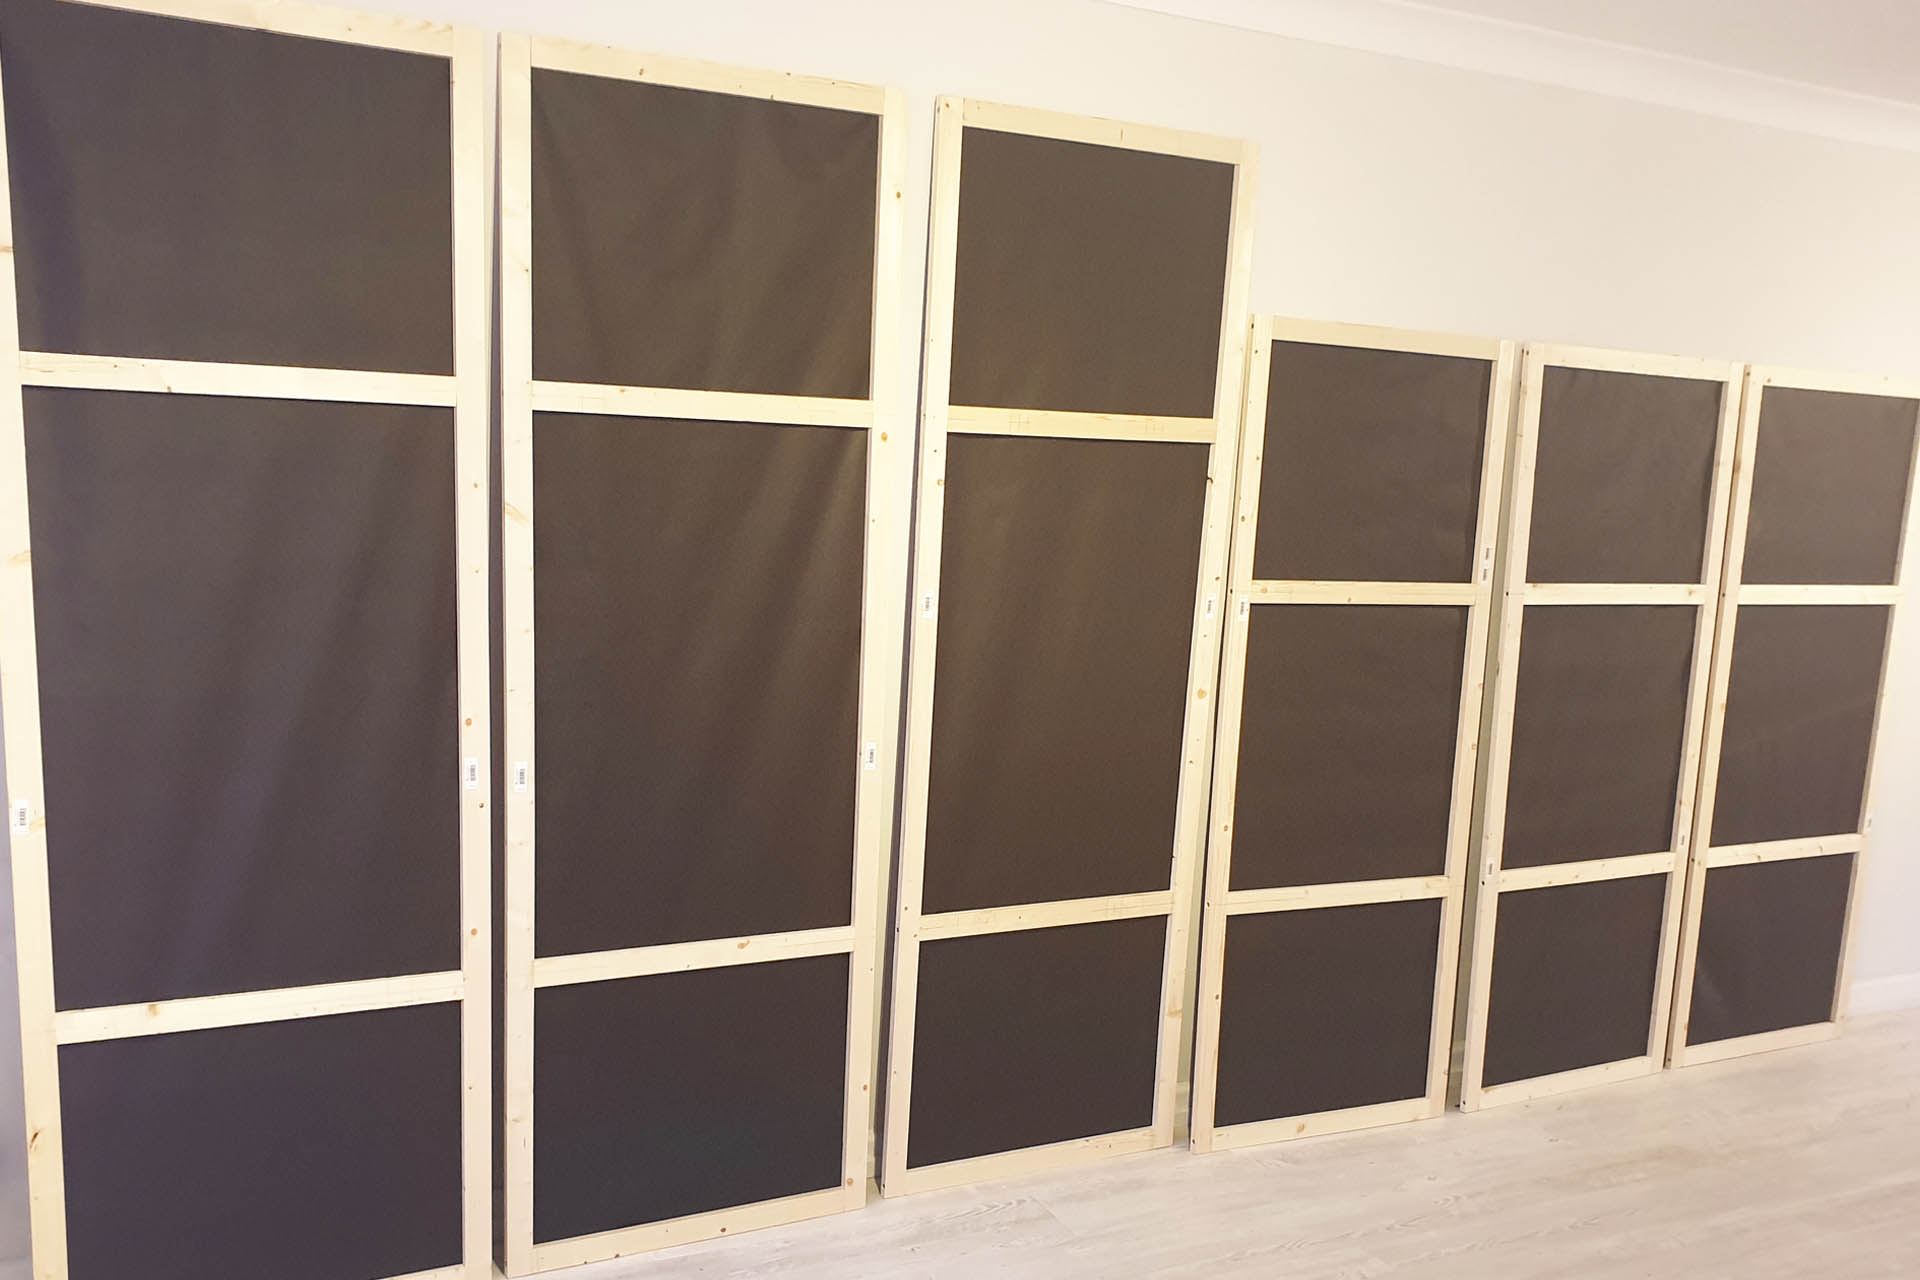 Frames for six DIY acoustic panels for my mic room